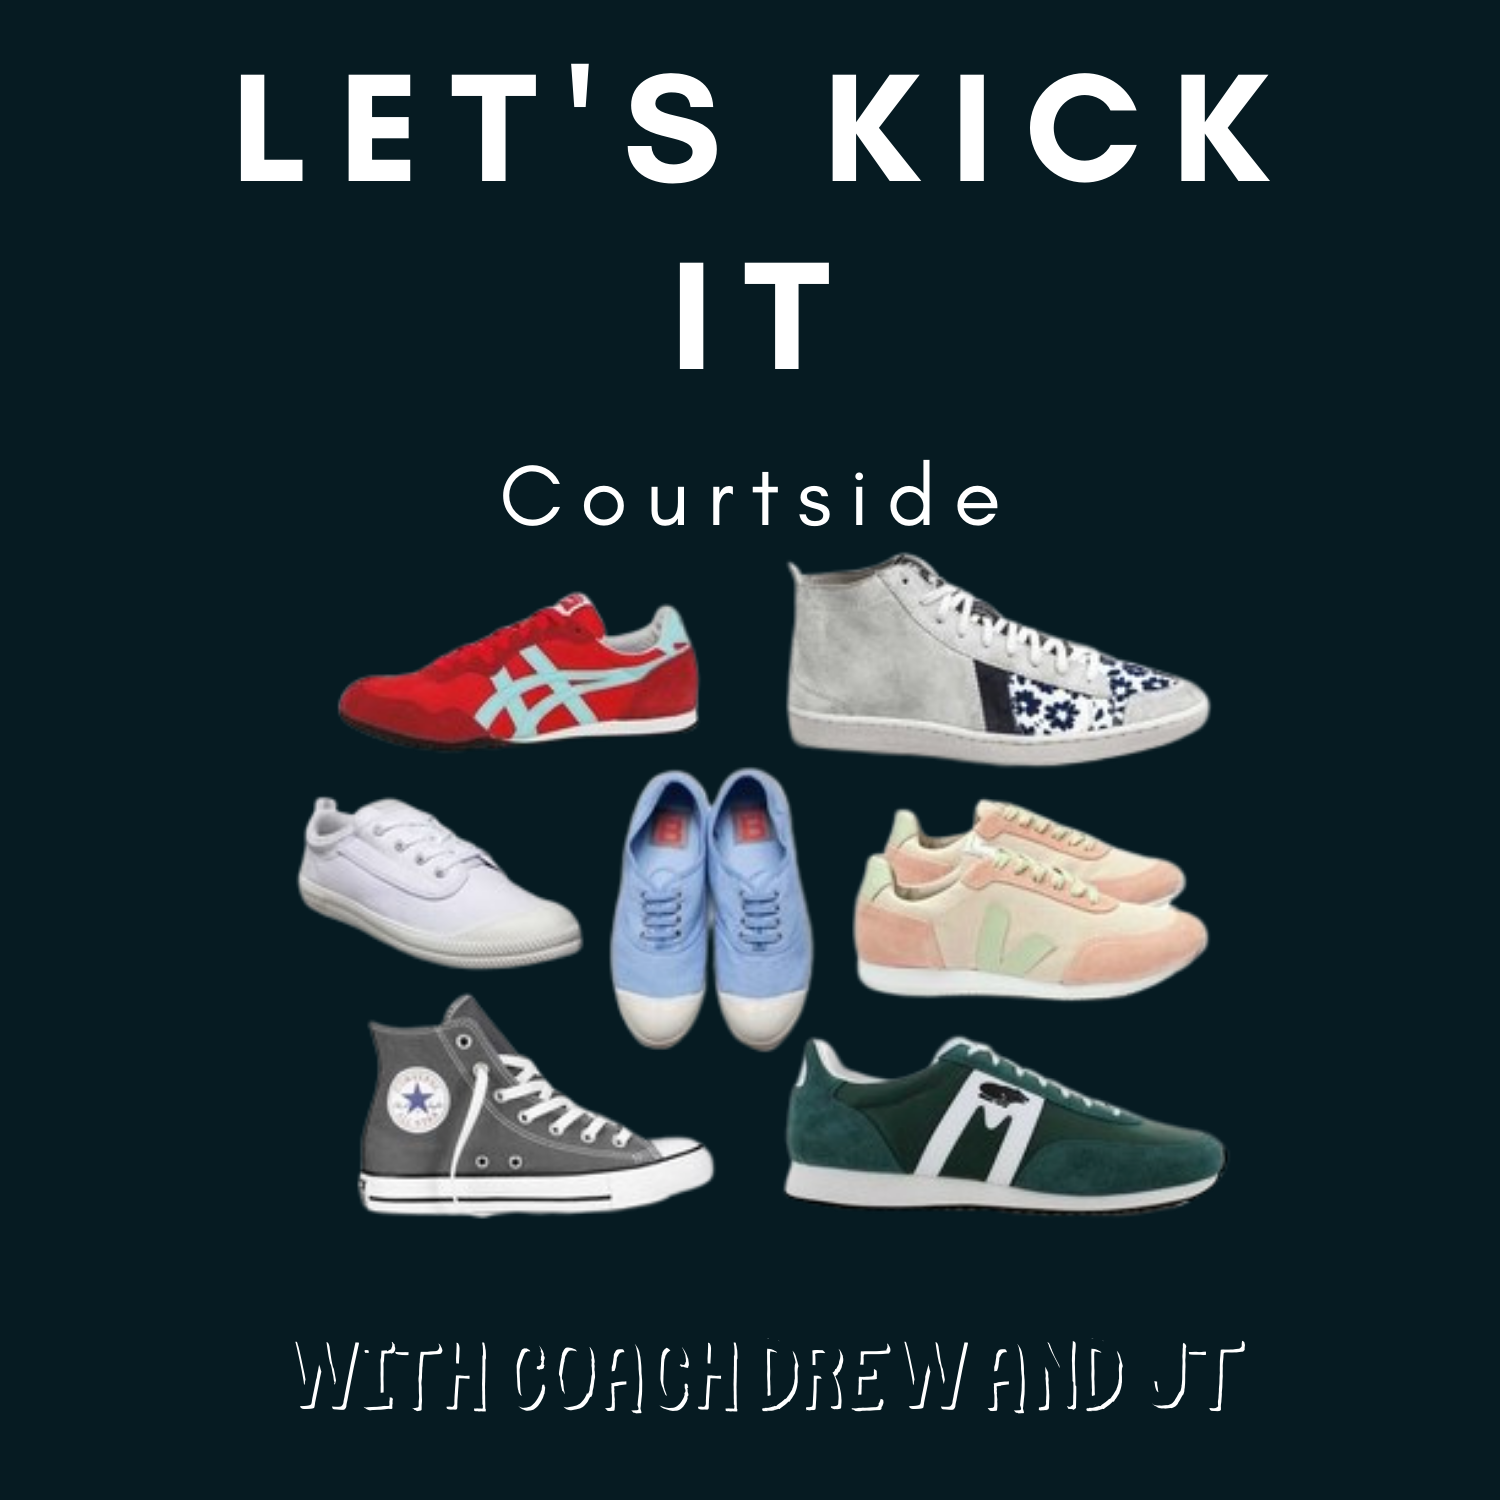 Let's Kick It - Kicking It Courtside | JT's Anniversary Gift